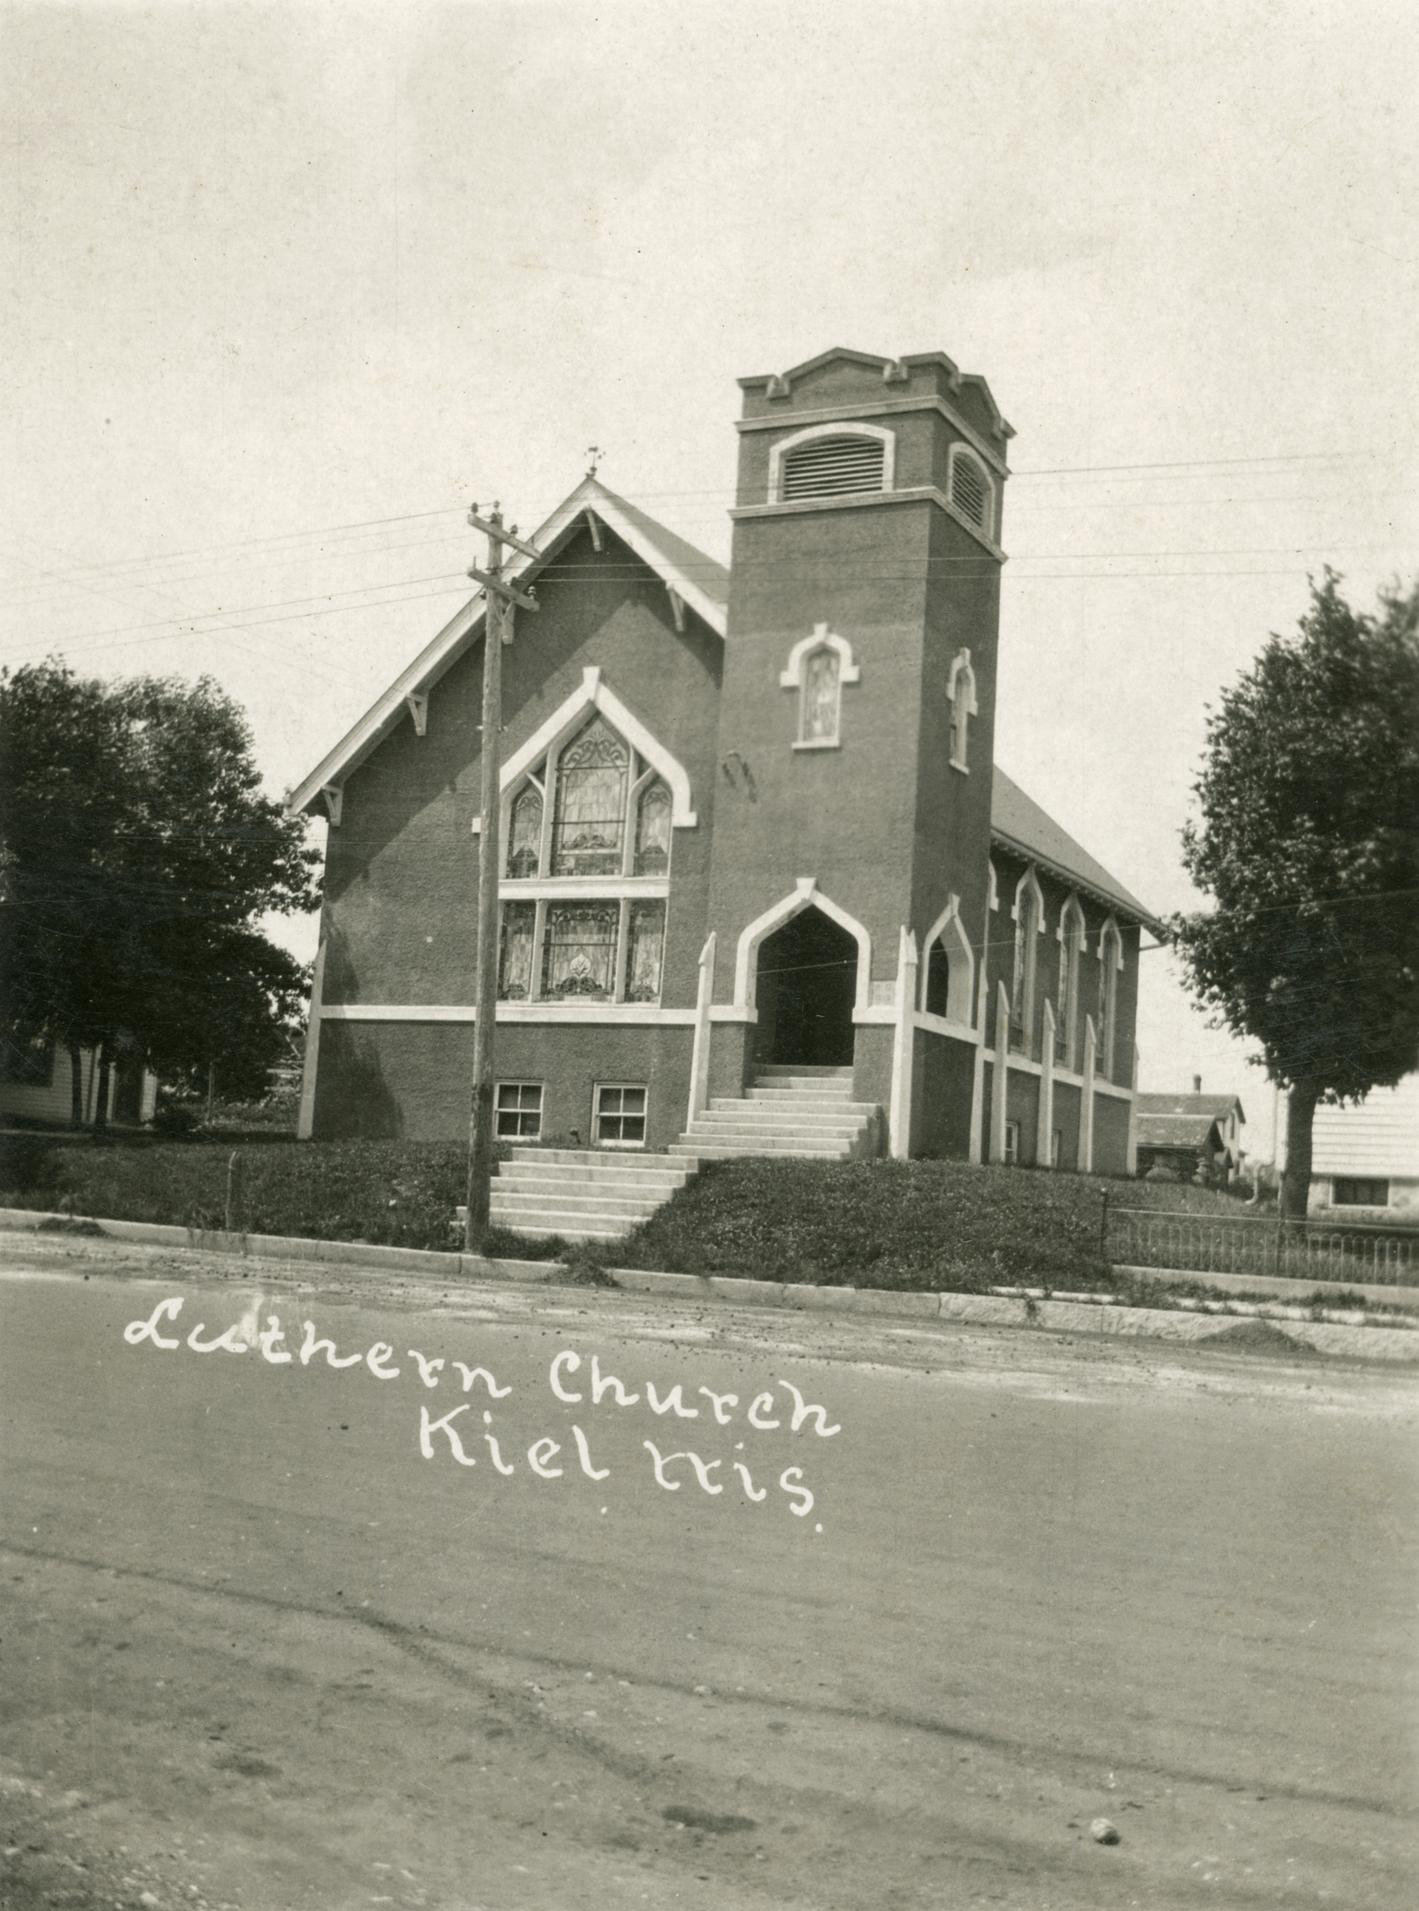 A sepia-toned historic photo shows a brick church building with a bell tower standing along the side of a road between two trees, with handwritten script on the image reading "Luthern Church" and "Kiel Wis."